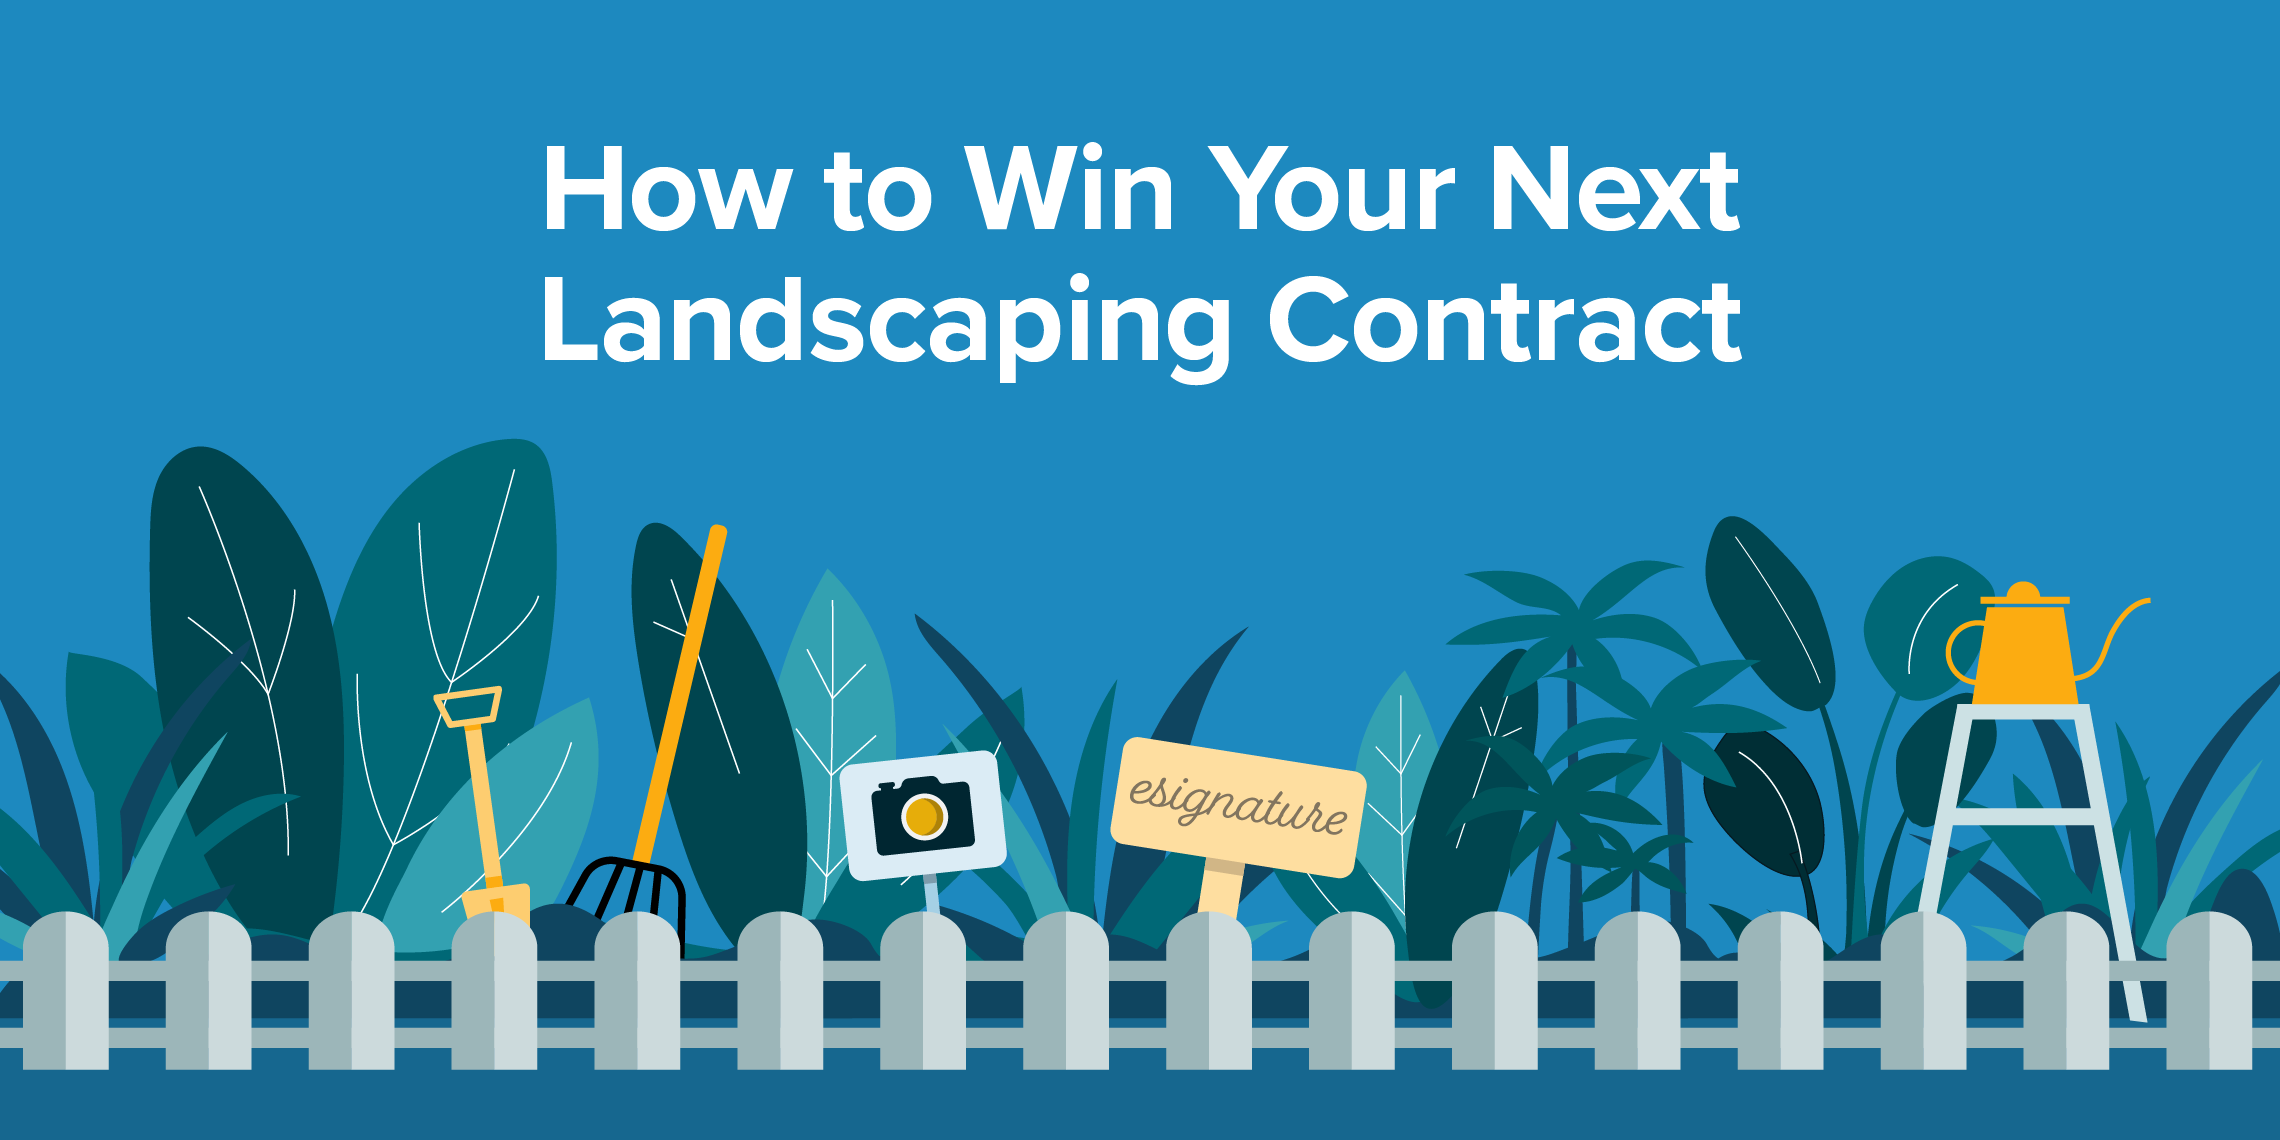 How to win your next landscaping contract